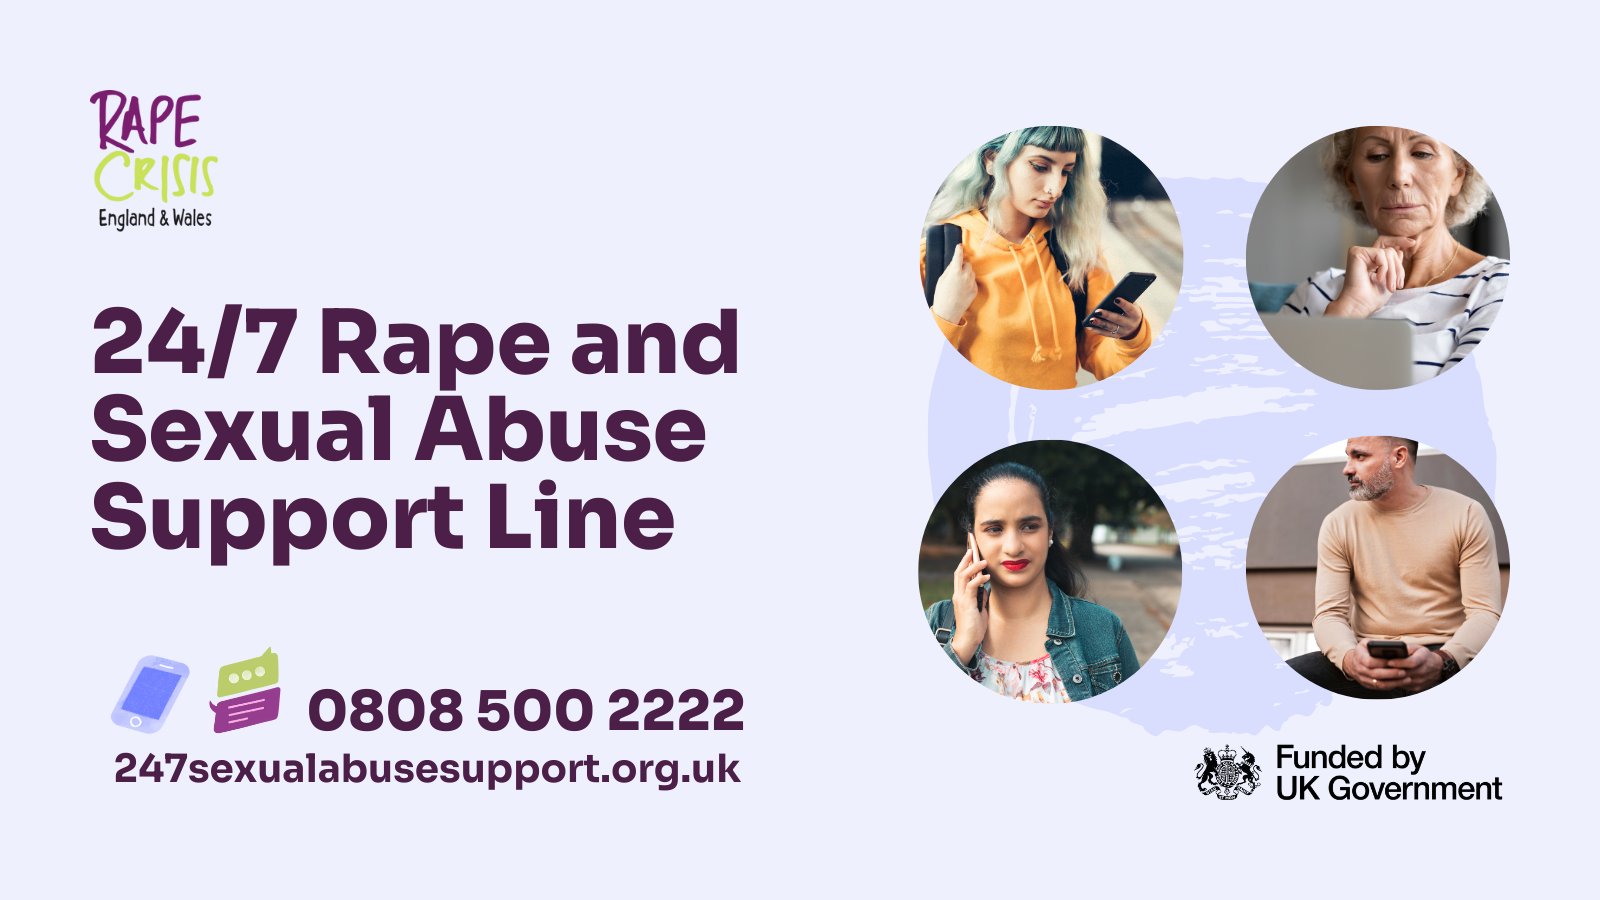 Rape Crisis England and Wales on Twitter